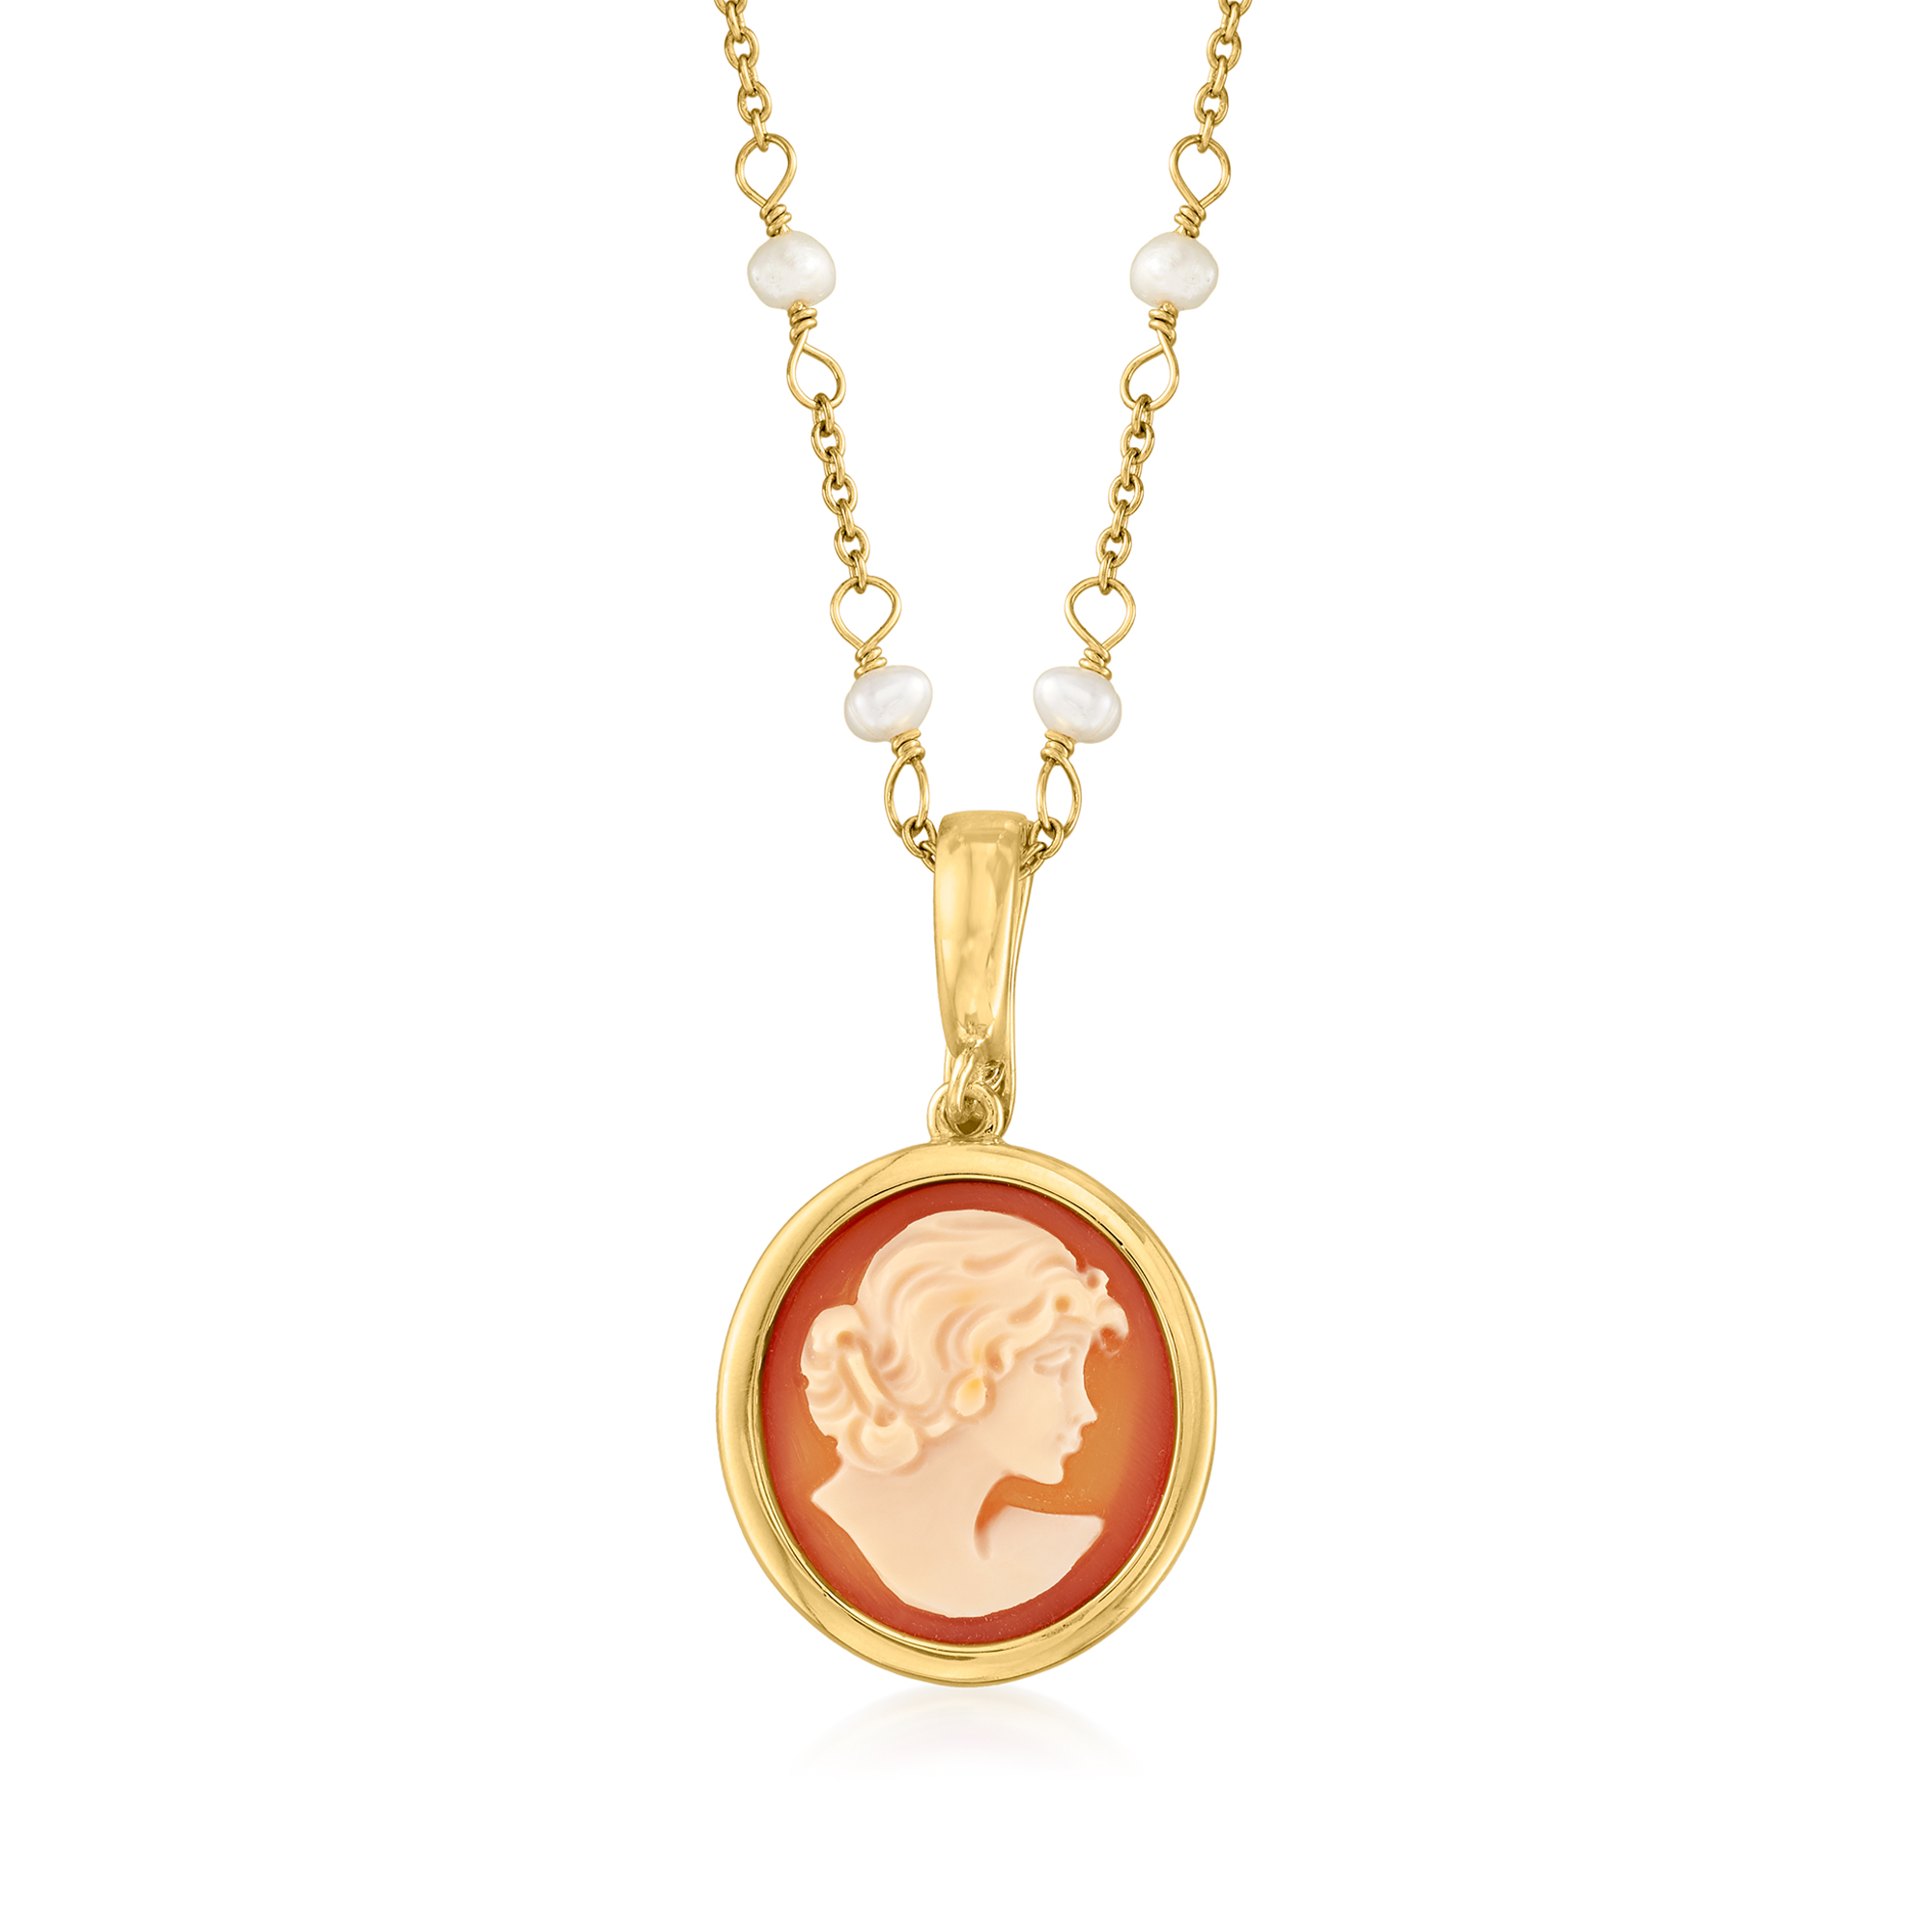 Italian Orange Shell Cameo Pendant Necklace with 3.5mm Cultured 